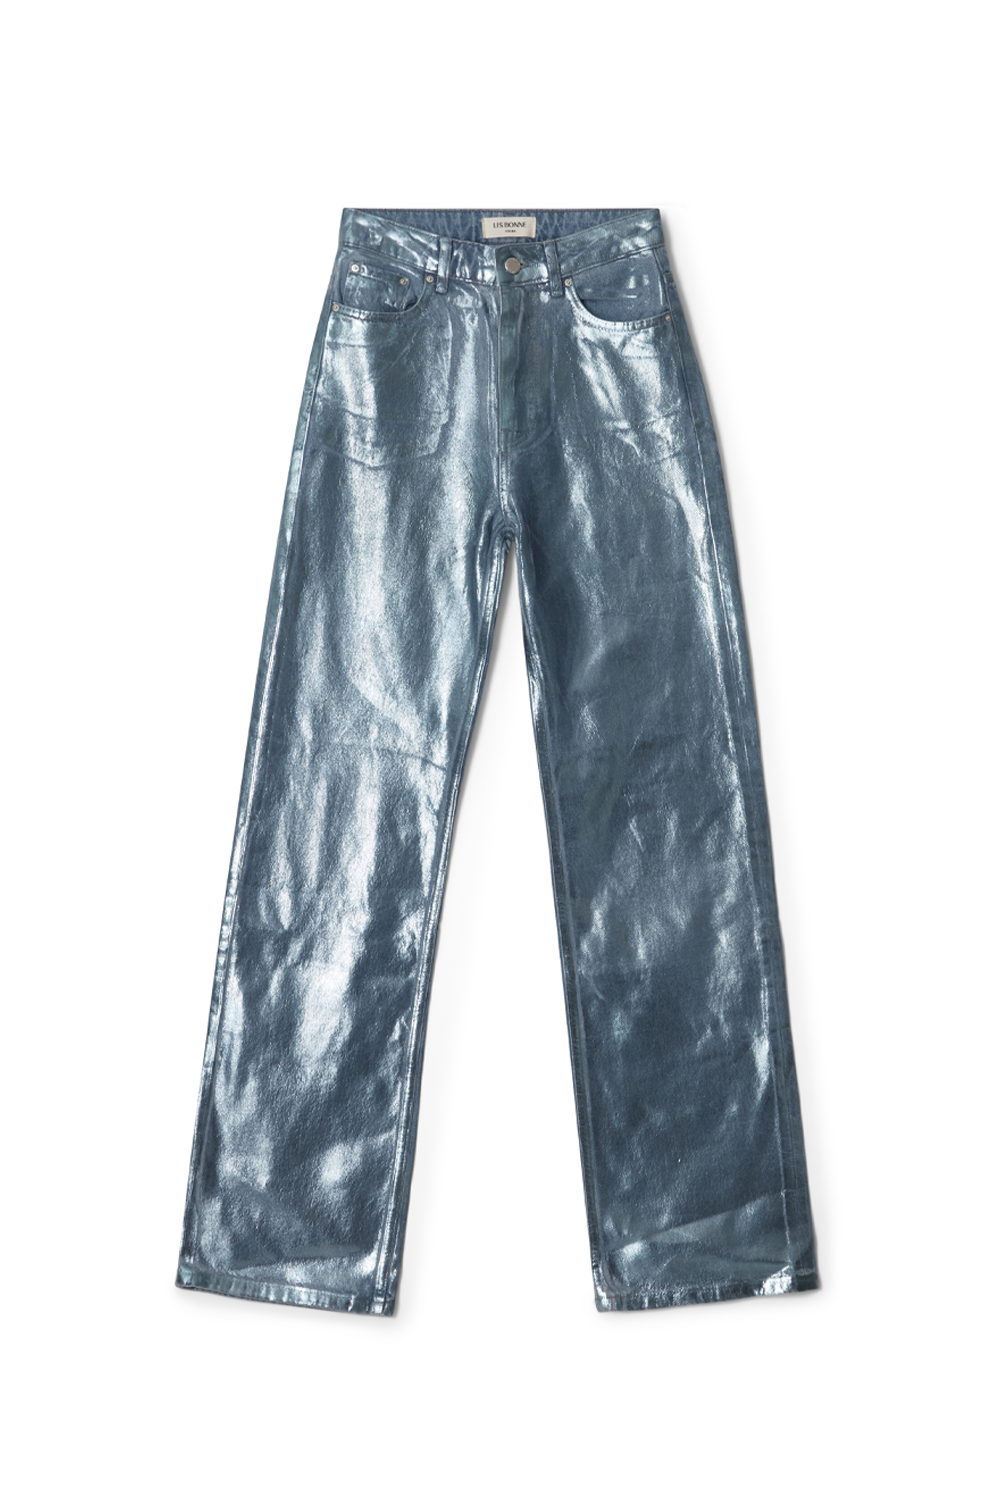 The Silver Denim Jeans